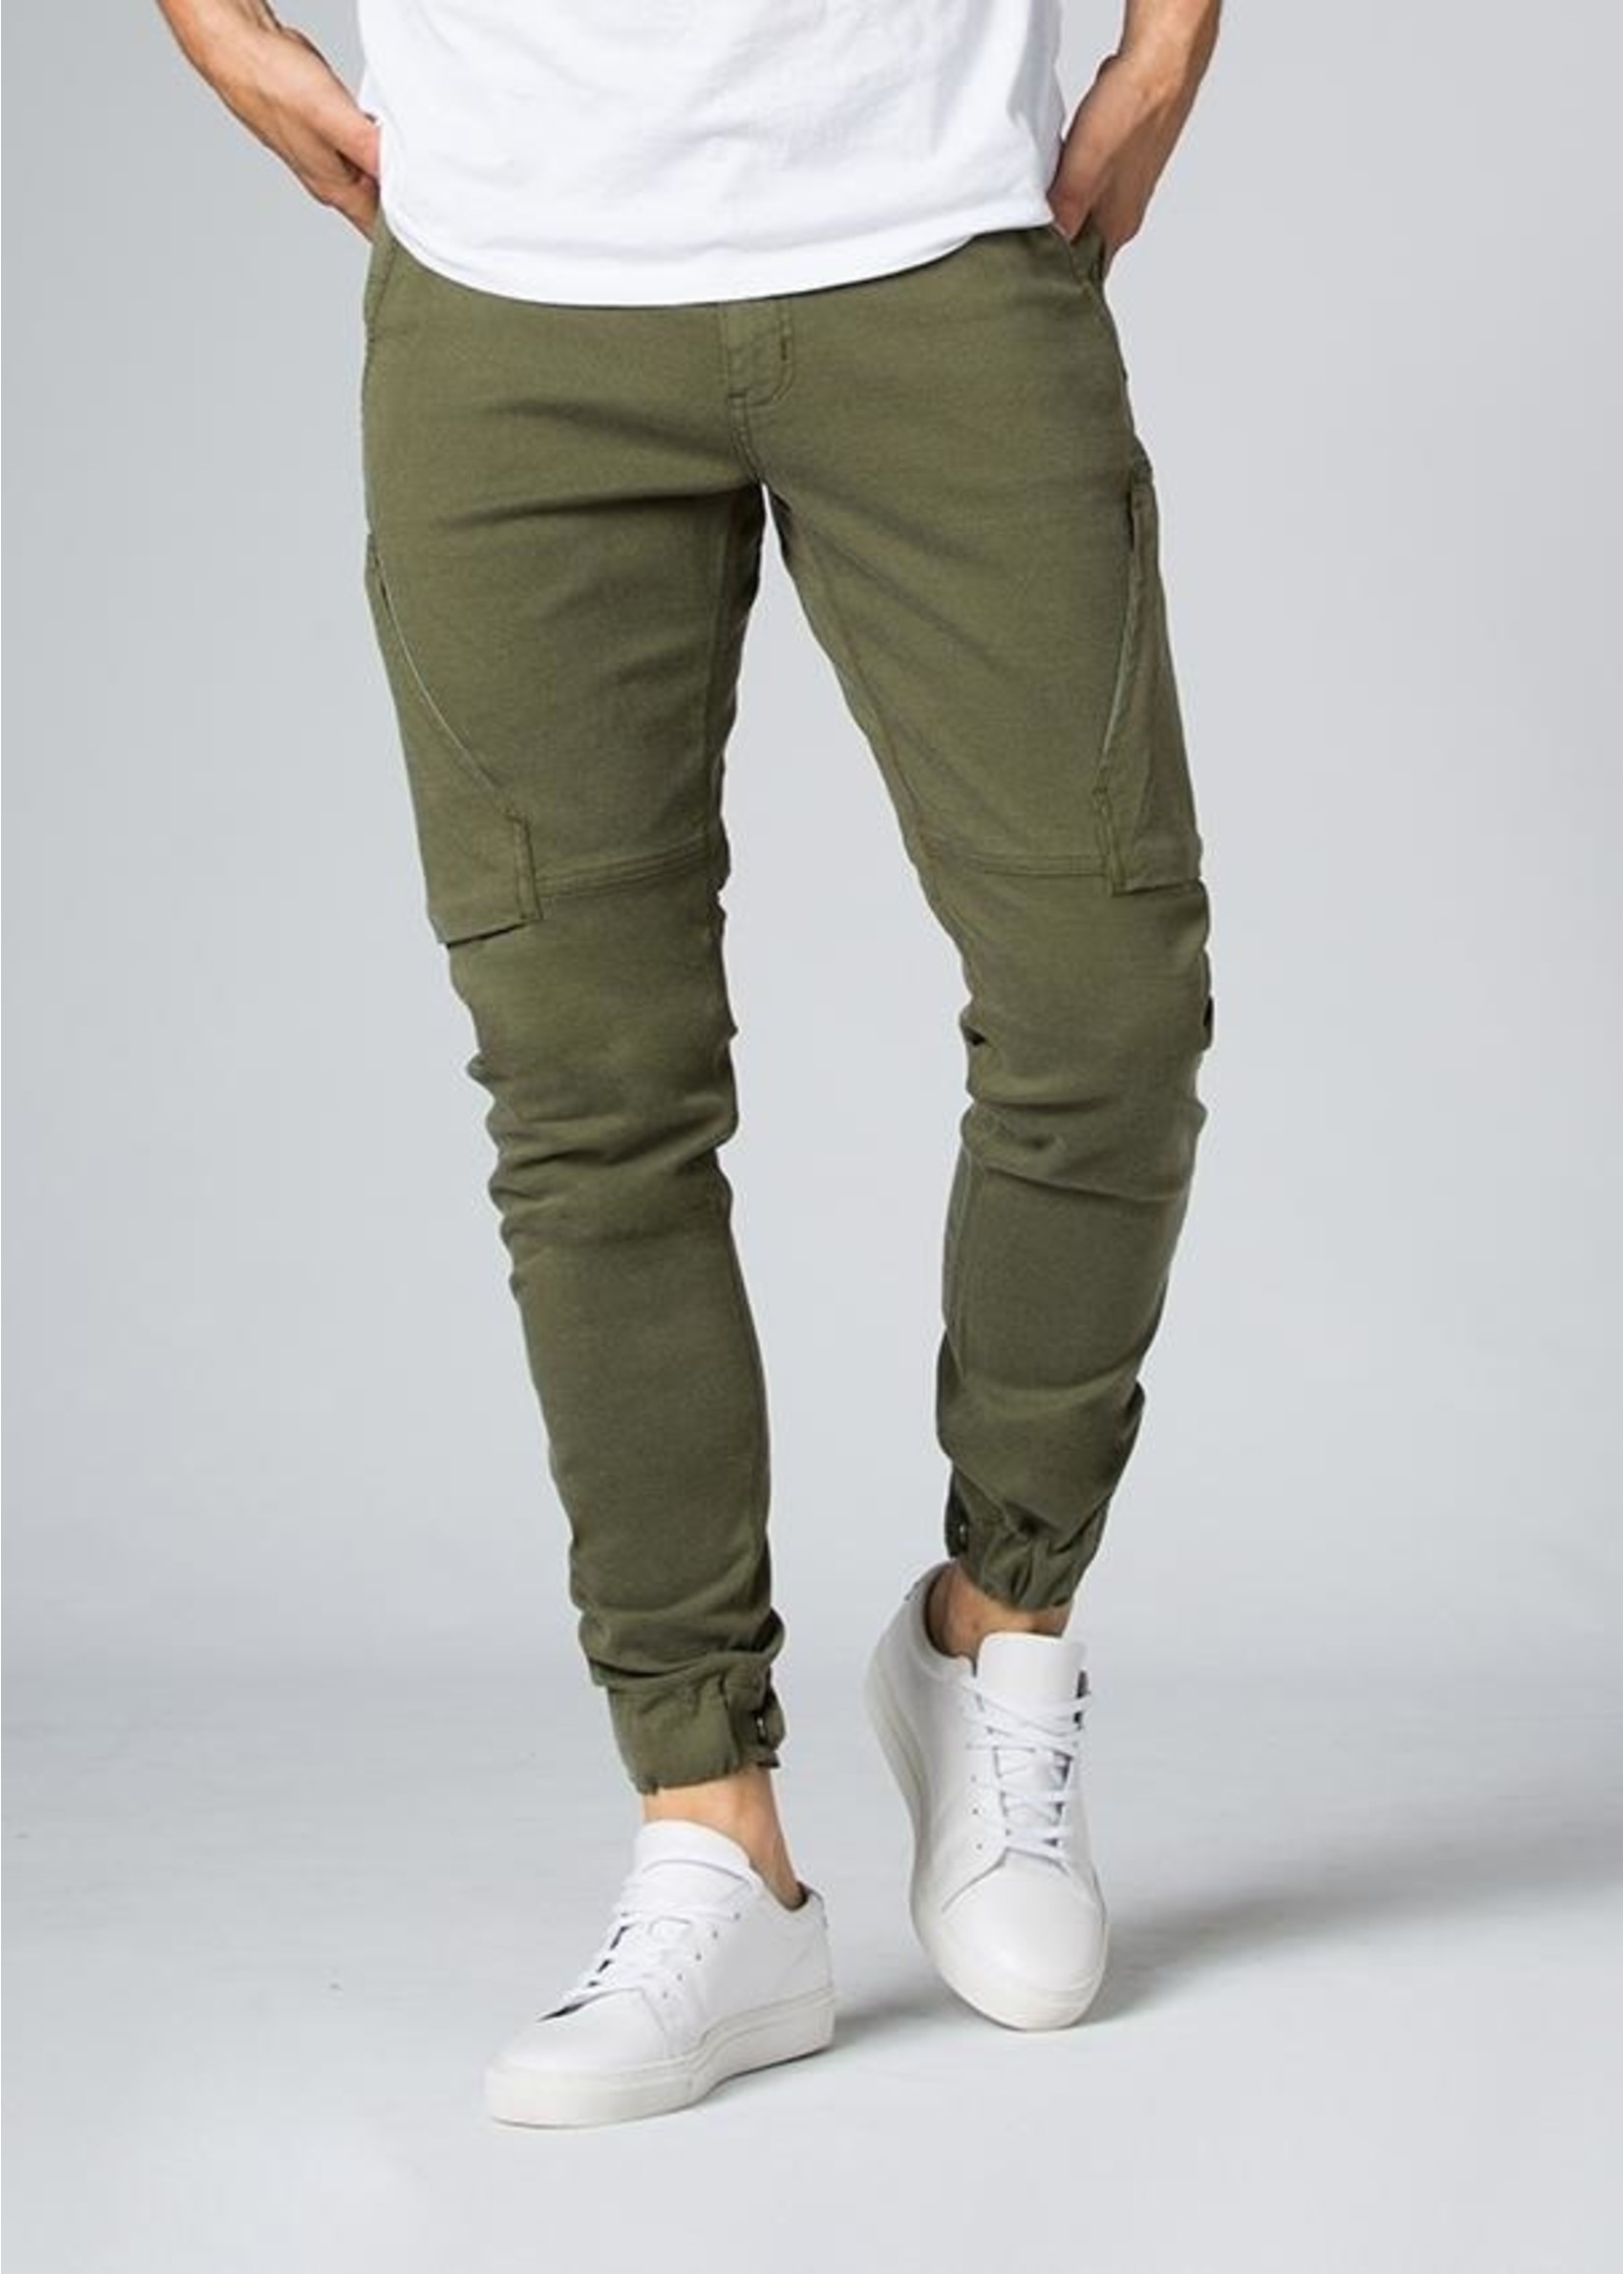 DUER Live Free Adventure Pant - Loden Green